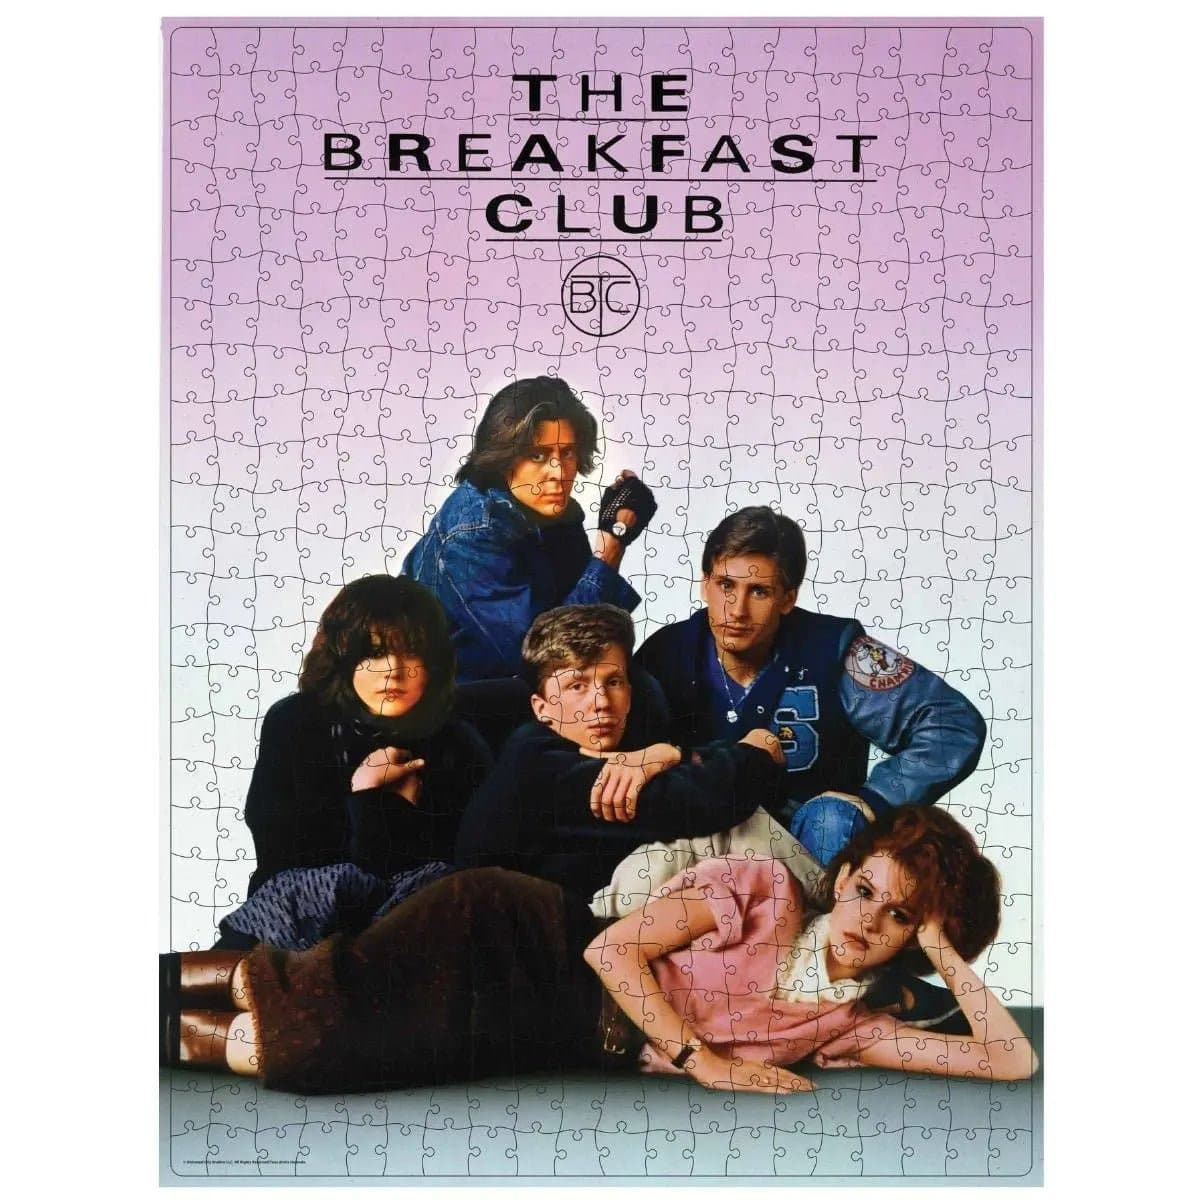 The Breakfast Club Movie 500pc VHS Blockbuster Jigsaw Puzzle - Simon's Collectibles